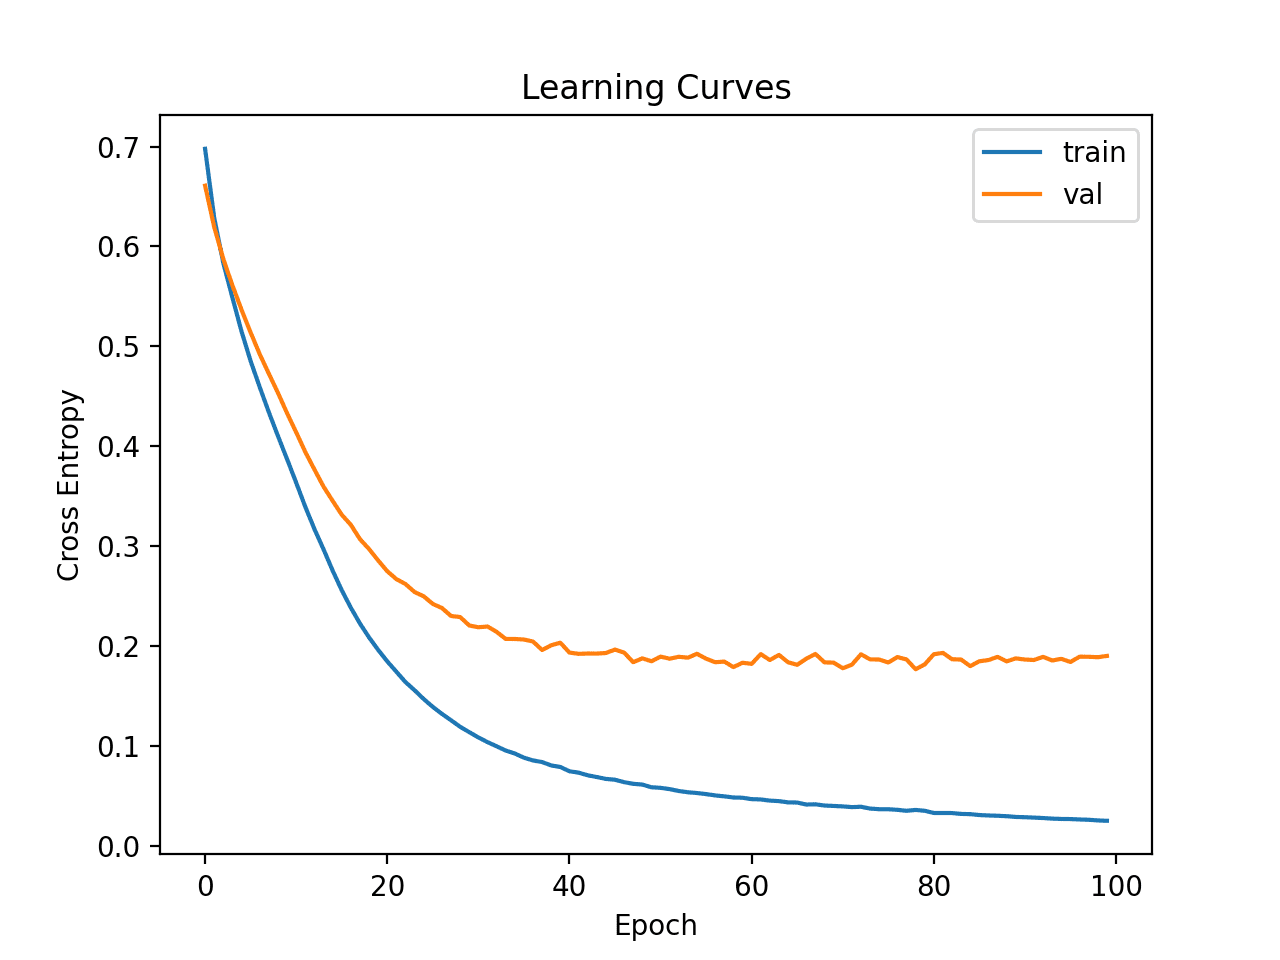 Learning Curves of Wider MLP on the Ionosphere Dataset